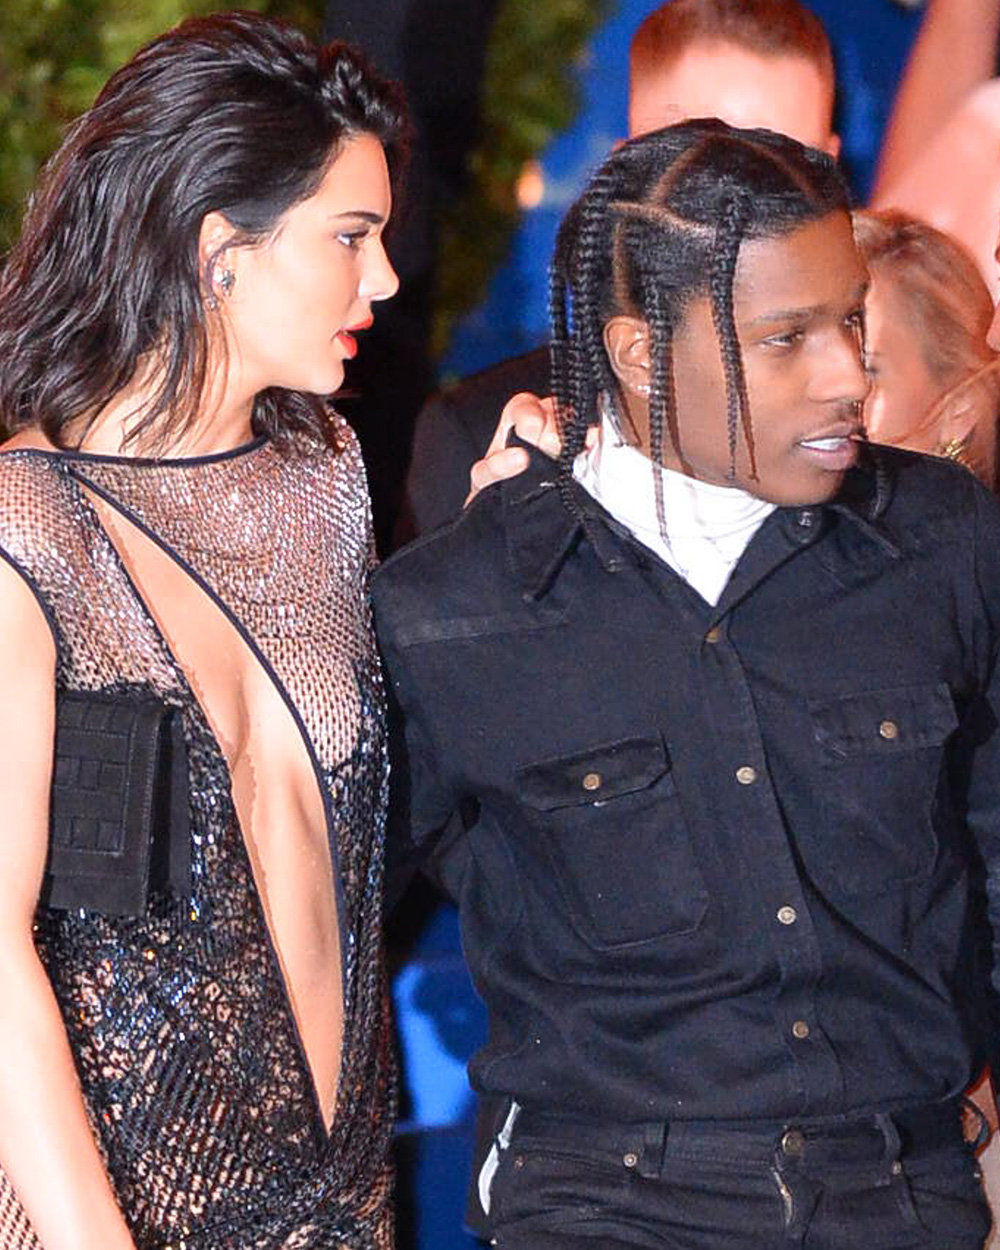 Kendall Jenner and A$AP Rocky are finally Instagram official